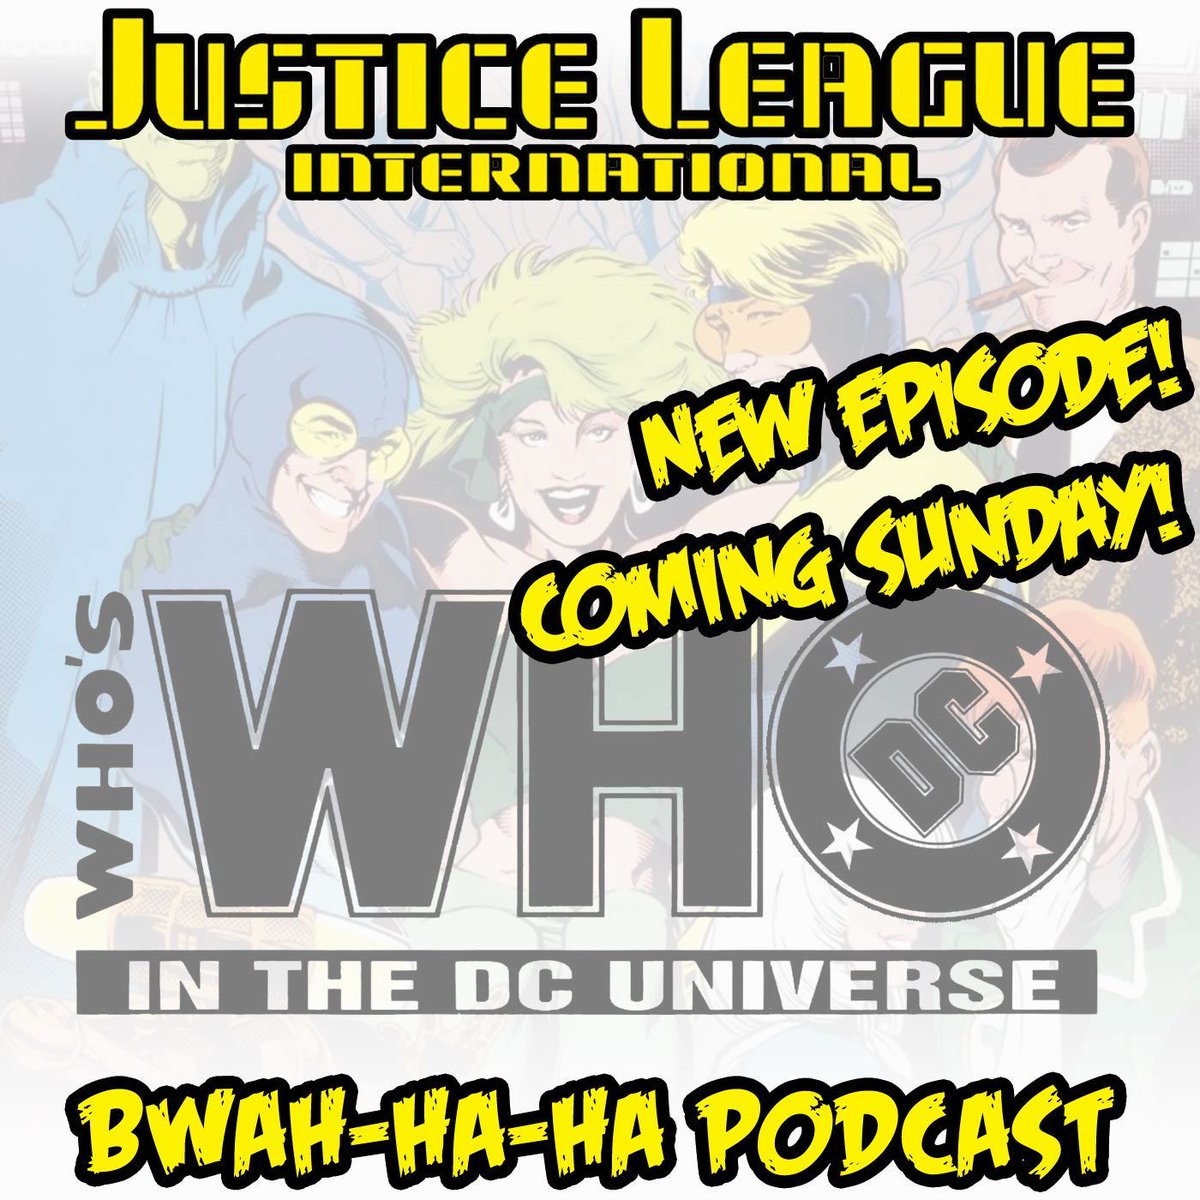 Coming Sunday, a new JLI PODCAST! We discuss 35 different WHO'S WHO entries of JLI characters! Plus, we reveal a brand new custom loose leaf WHO'S WHO page for JUSTICE LEAUGE EUROPE!